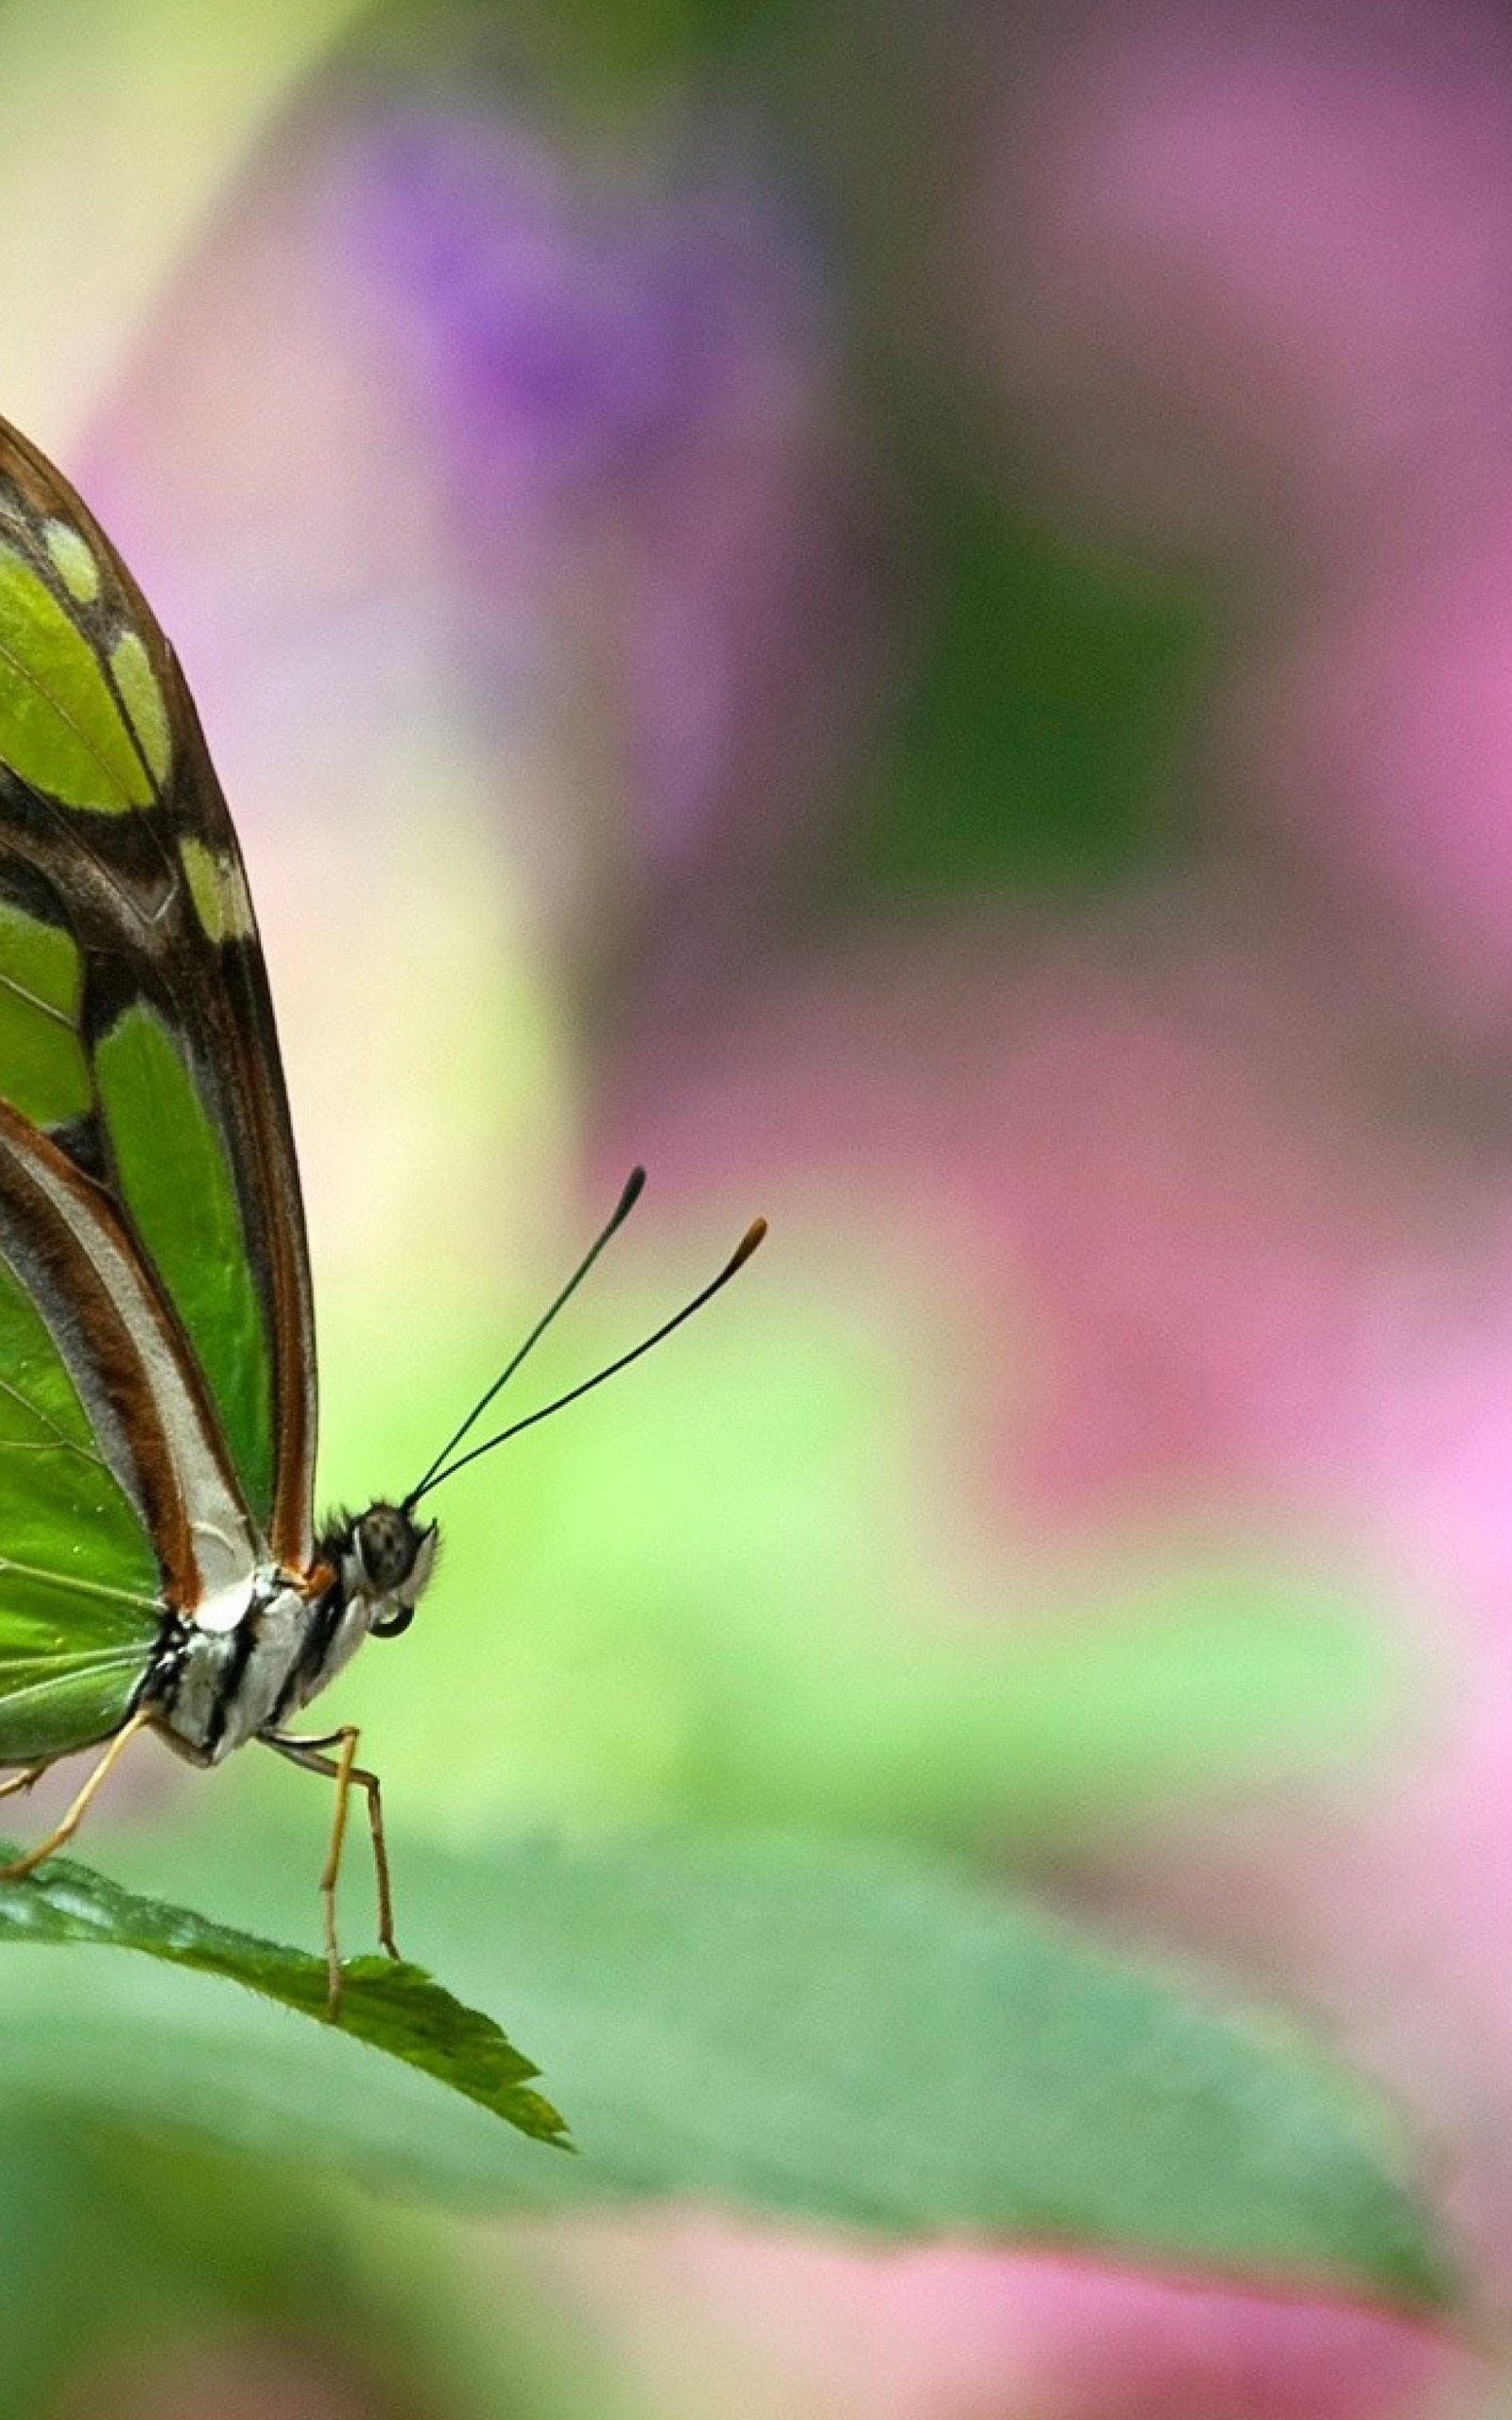 Image: Butterfly, wings, antennae, leaf, green